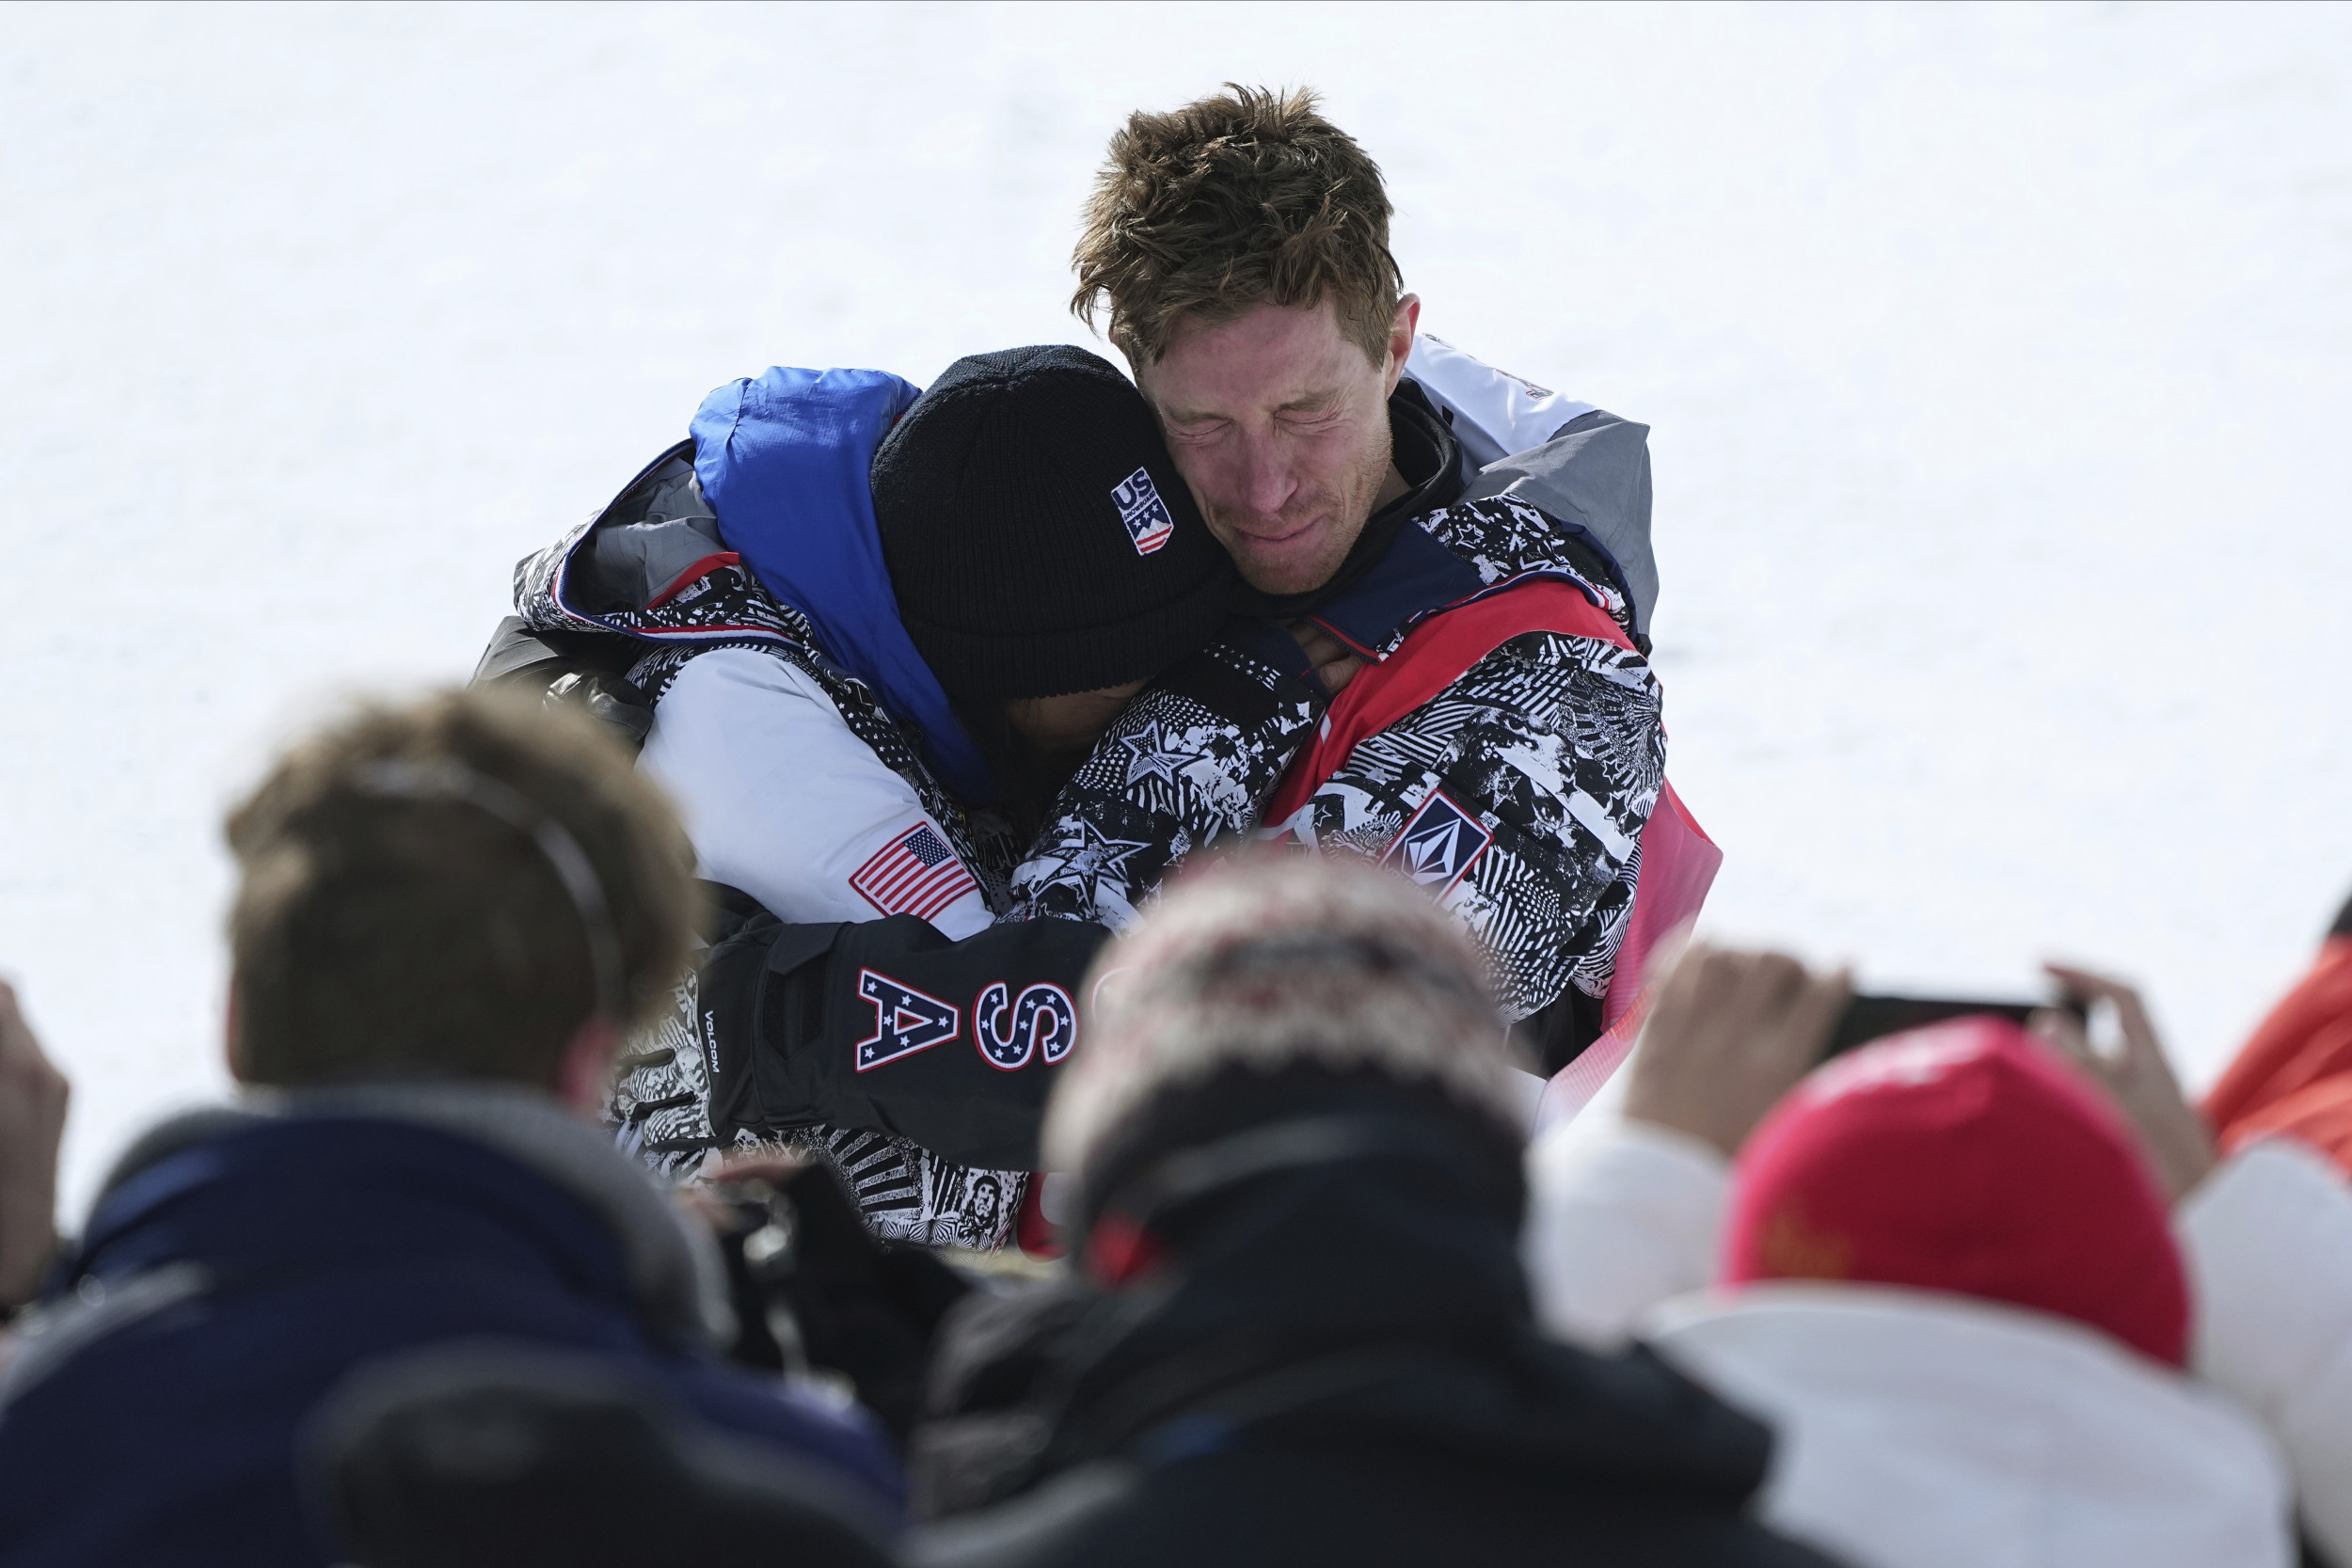 Watch Shaun White's tearful interview after final Olympics competition